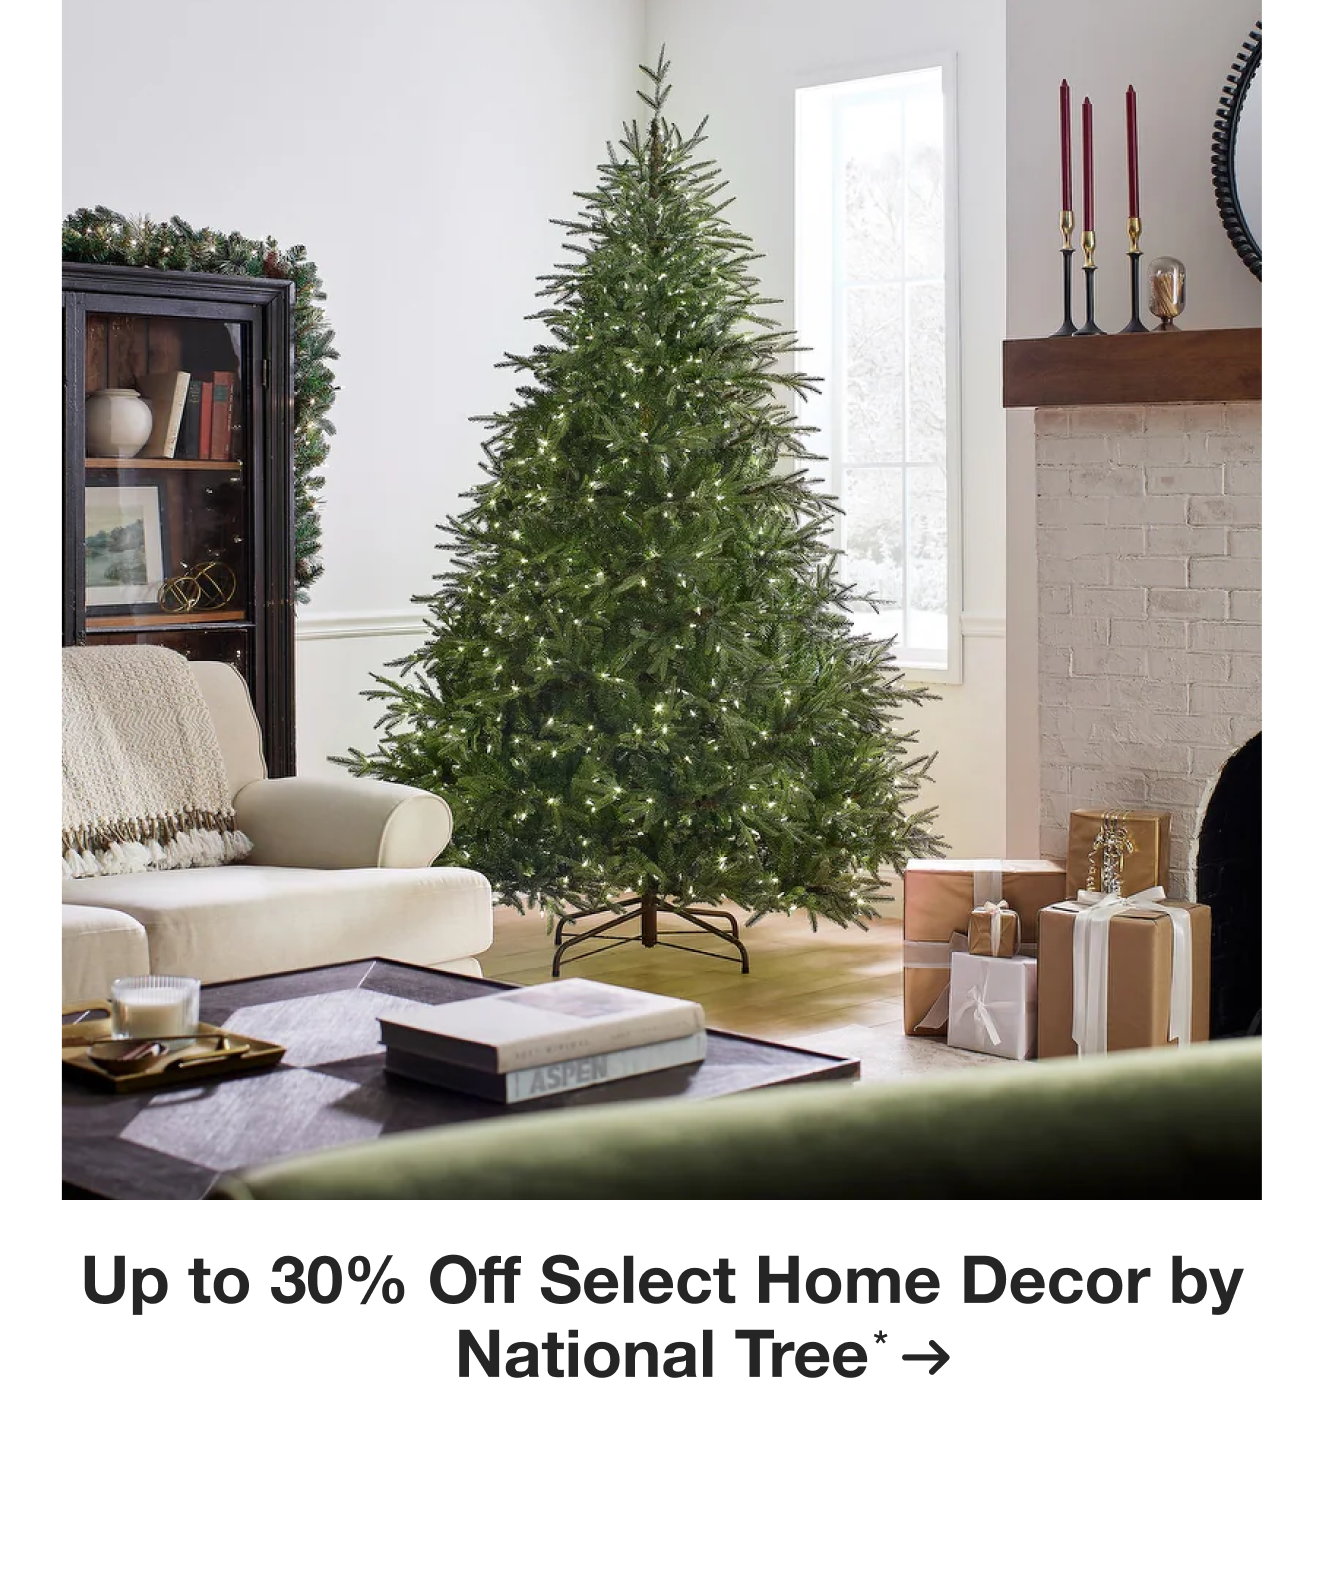 Up to 30% Off Select Home Decor by National Tree*